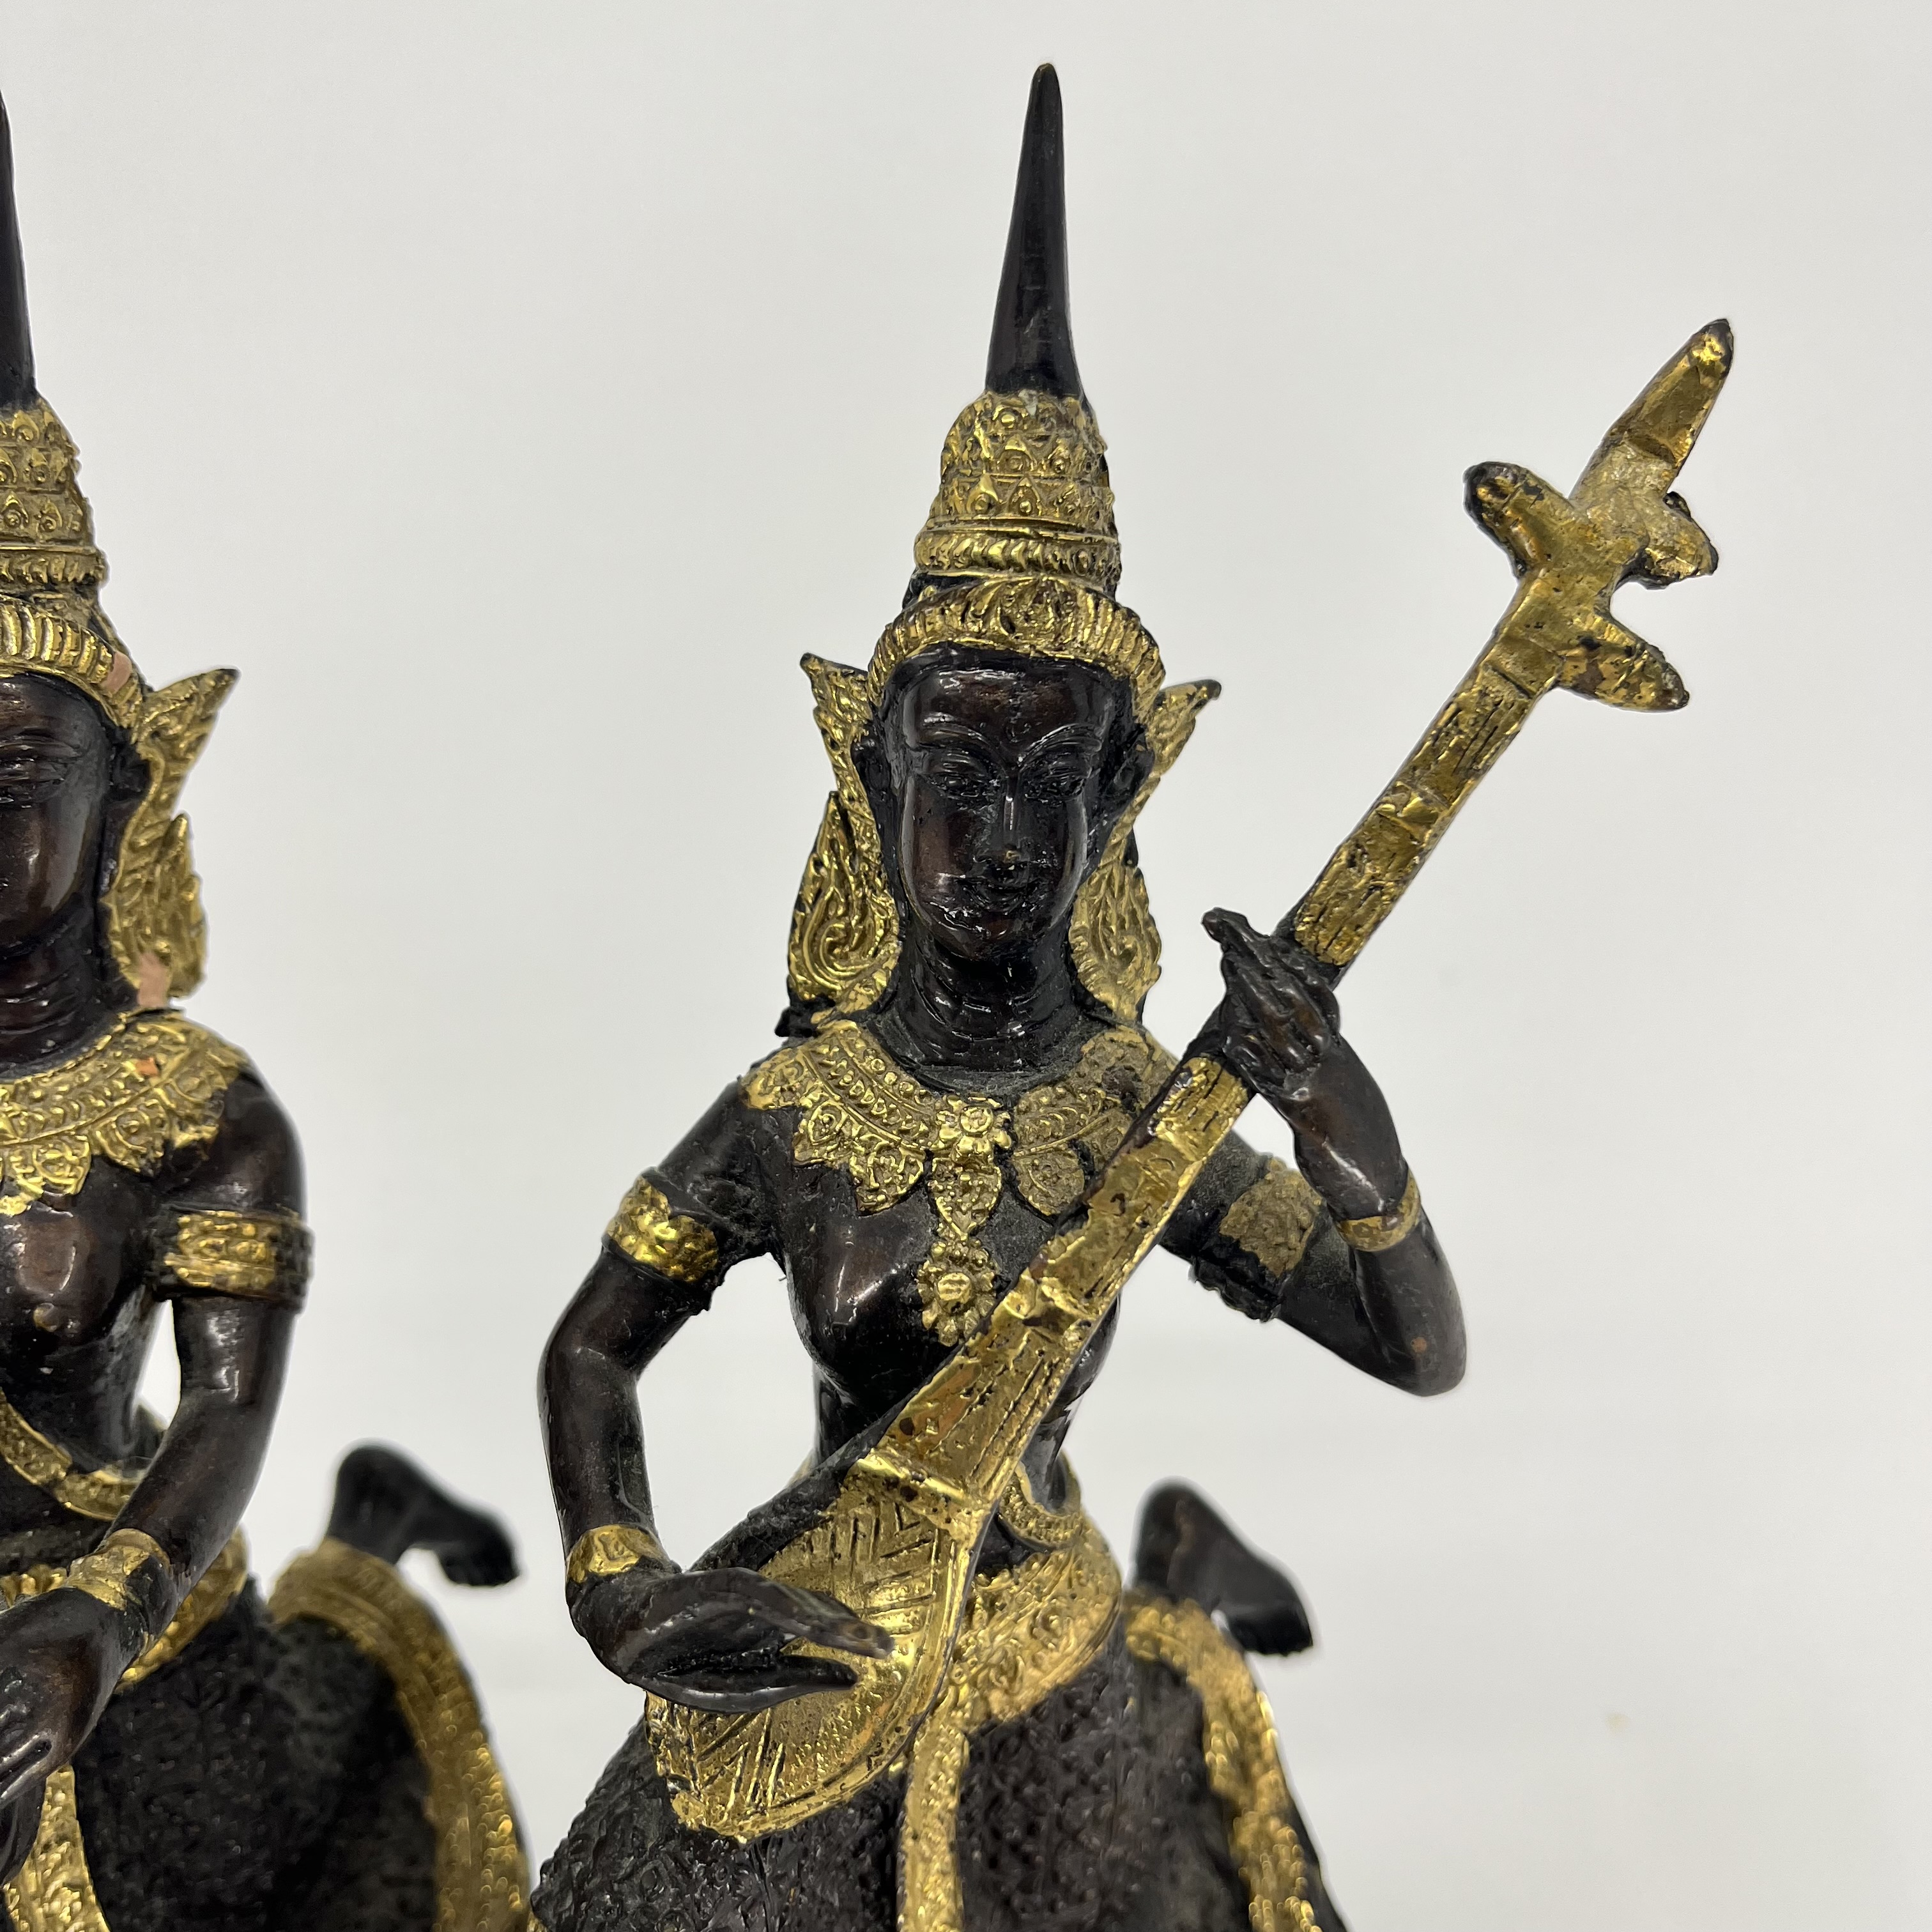 A Pair of Gilded Bronze Thai Theppanom Angel Temple Musician Figurines - Image 6 of 7